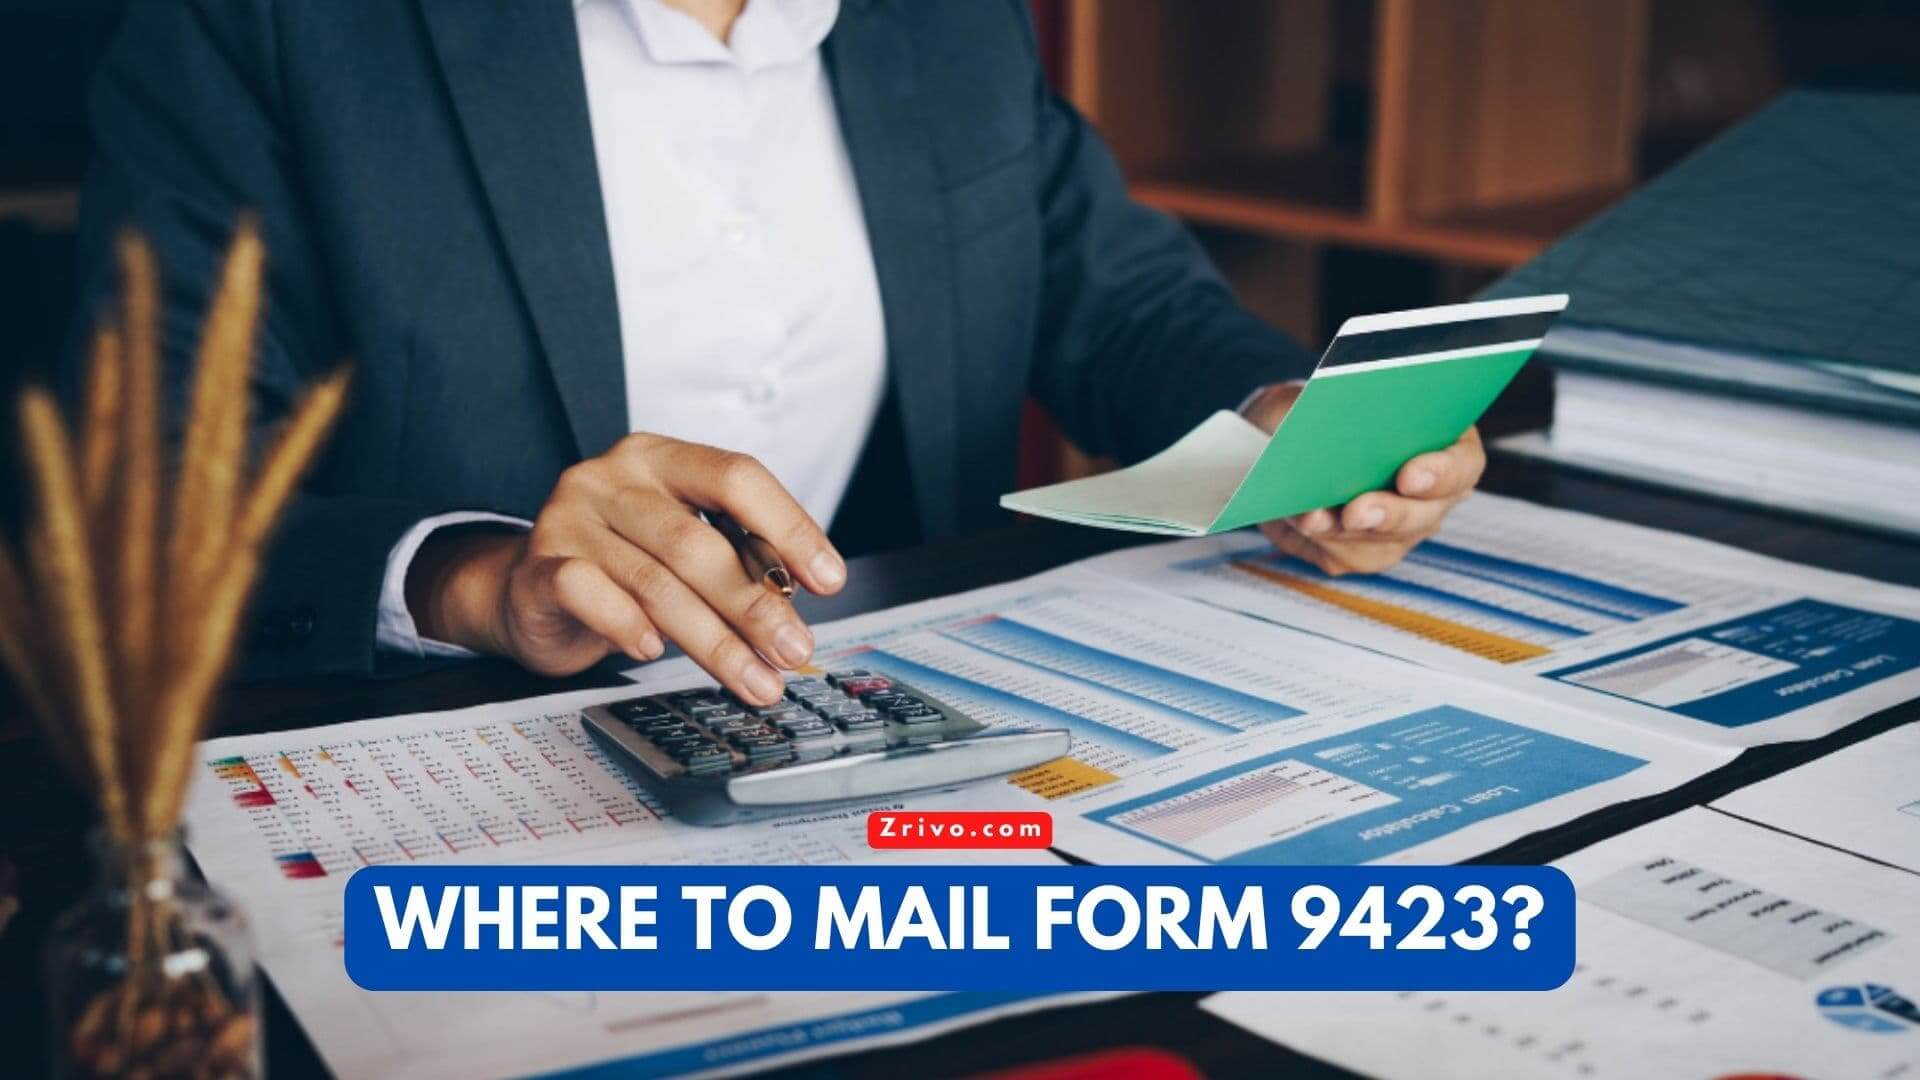 Where to Mail Form 9423?